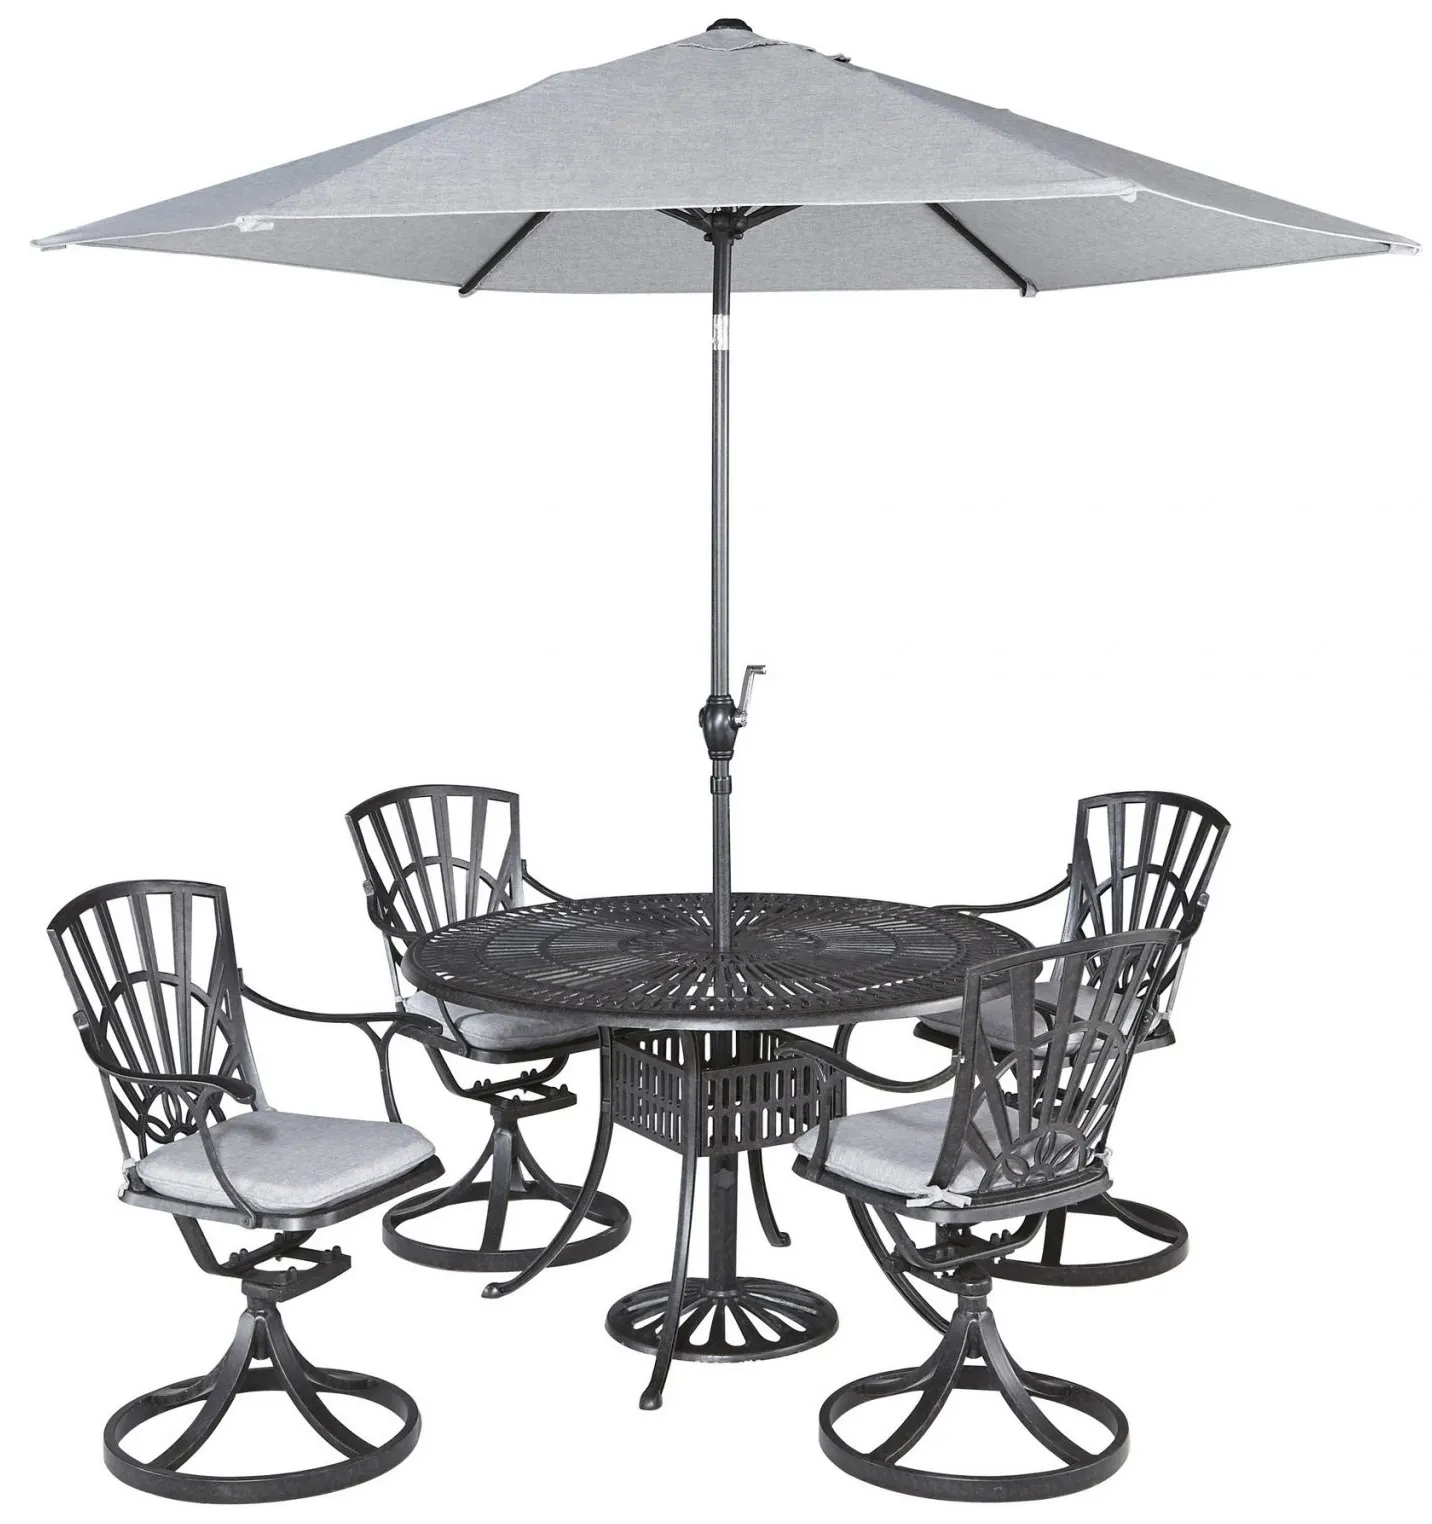 Grenada 6 Piece Outdoor Dining Set by homestyles